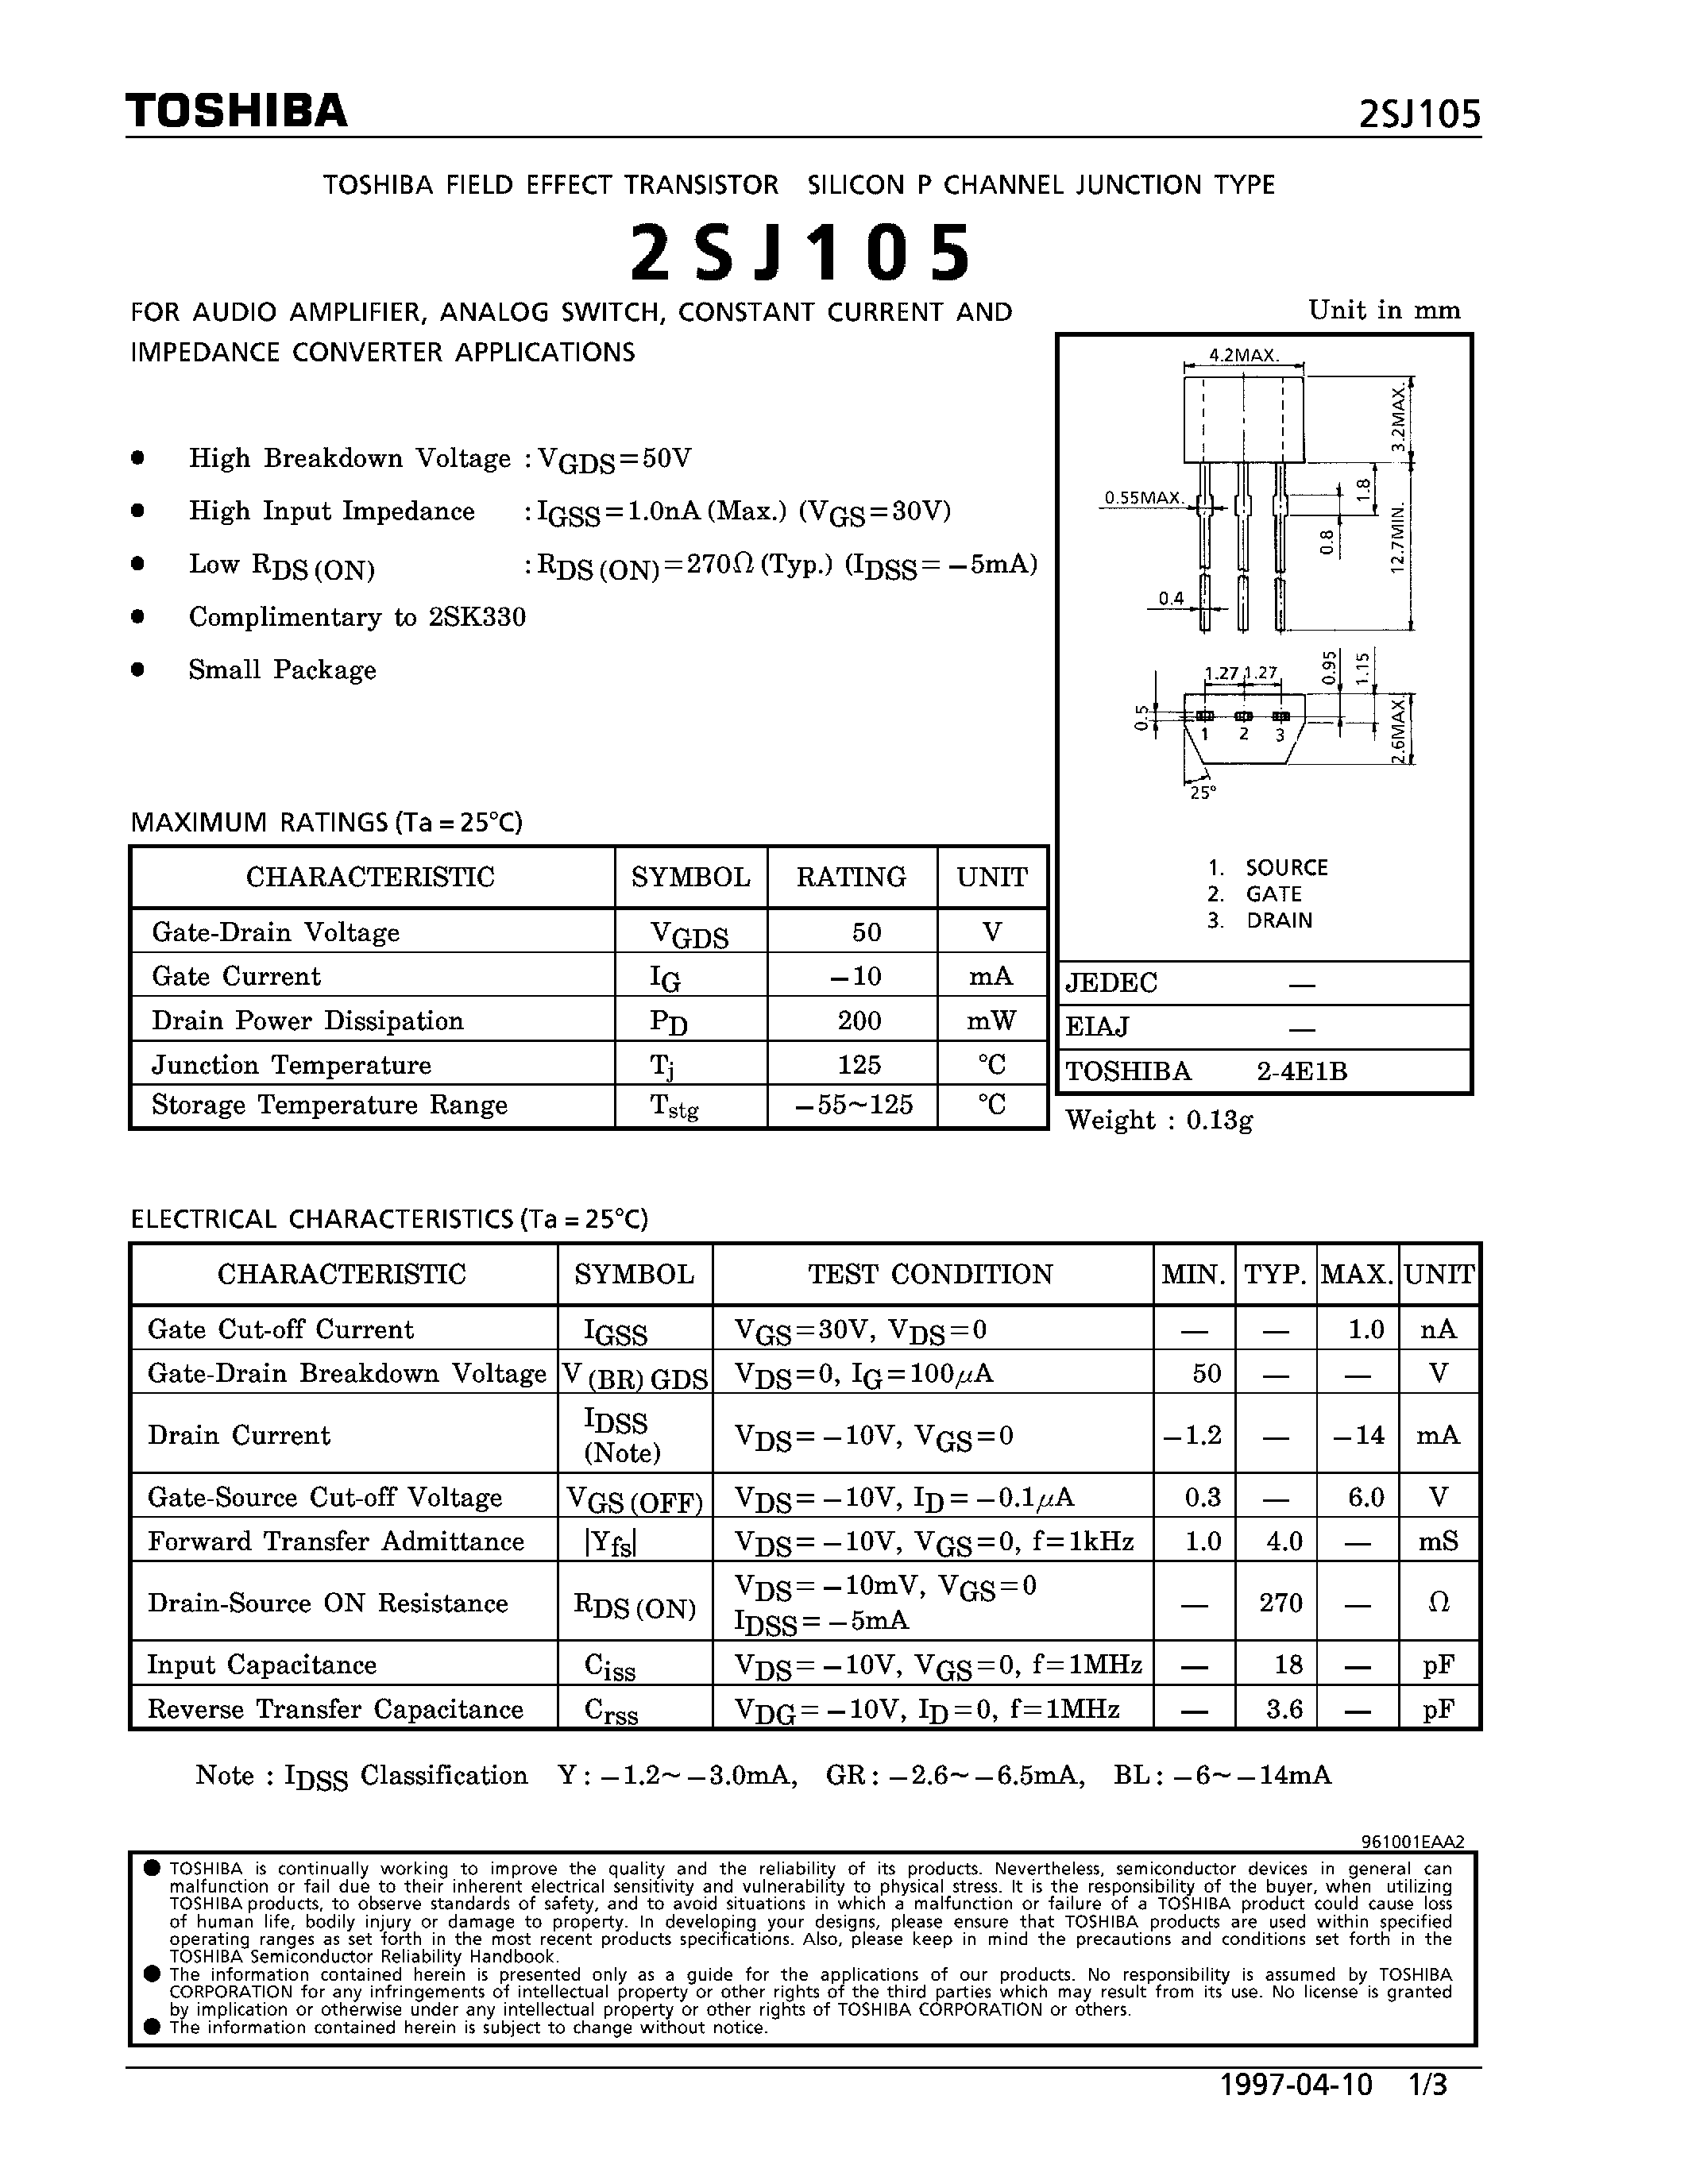 Datasheet 2SJ105 - P CHANNEL JUNCTION TYPE (FOR AUDIO AMPLIFIER/ ANALOG SWITCH/ CONSTANT CURRENT AND IMPEDANCE CONVERTER APPLICATIONS) page 1